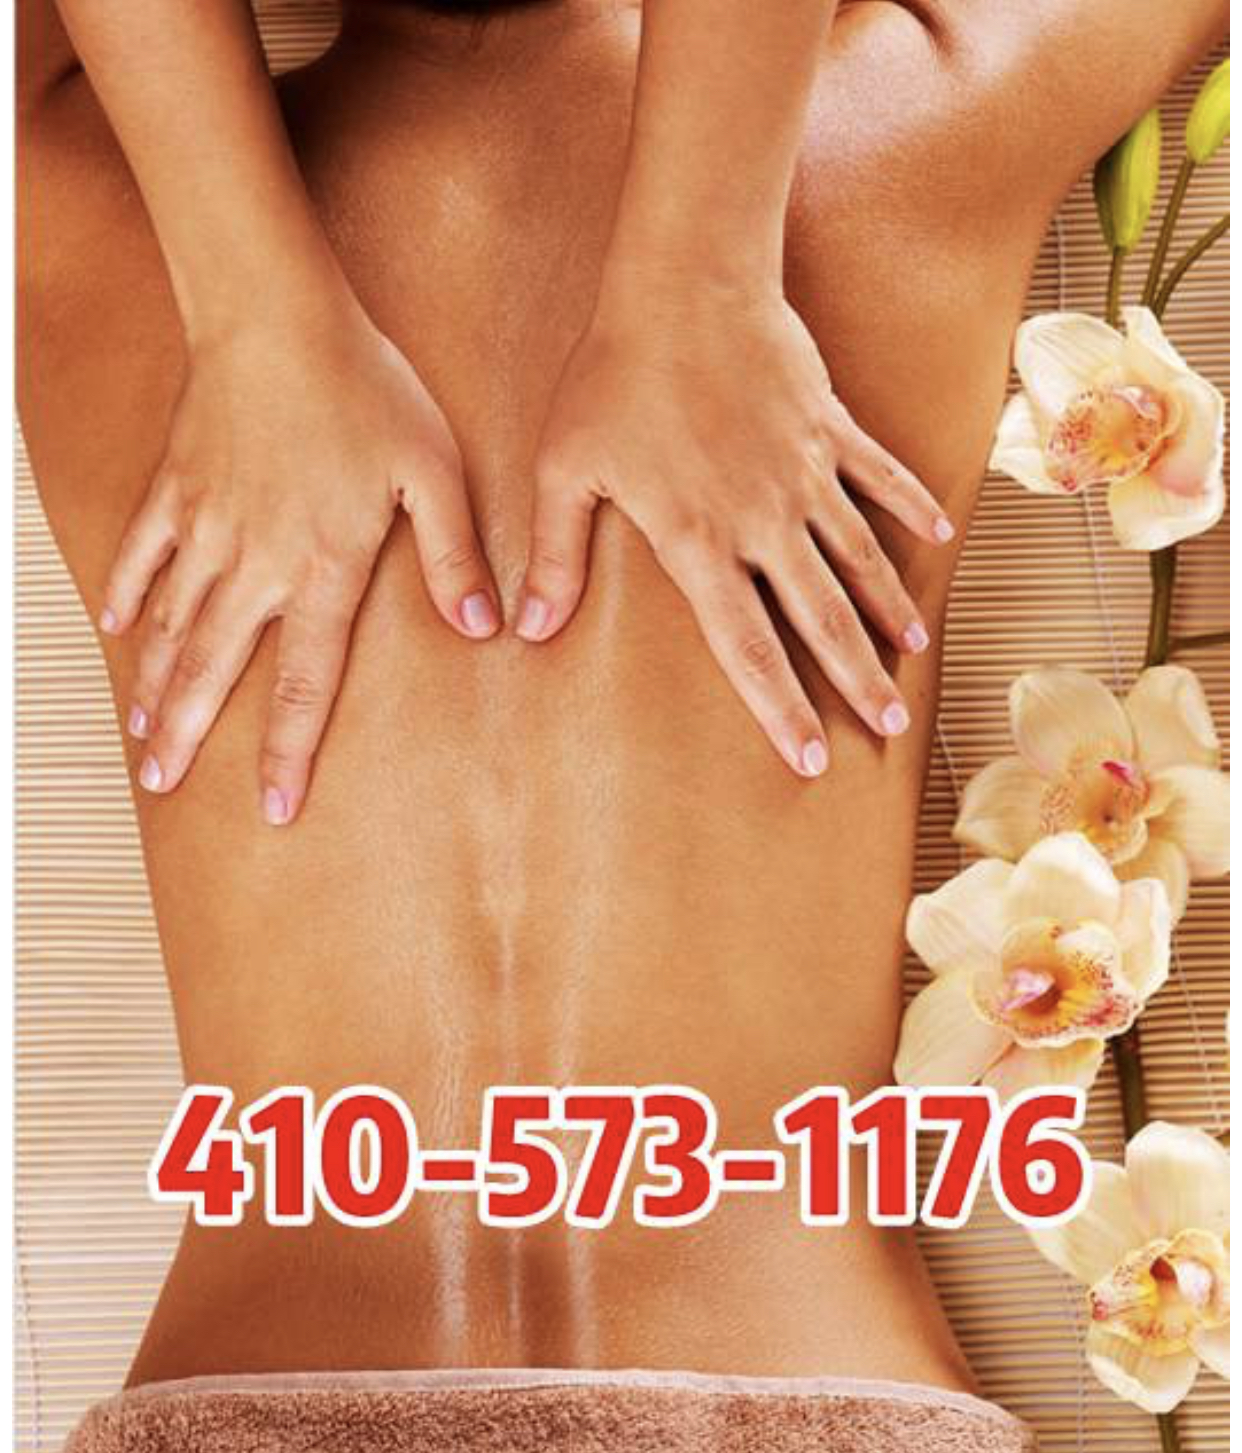 Happy Feet Spa 1450 Ritchie Hwy #111, Arnold Maryland 21012